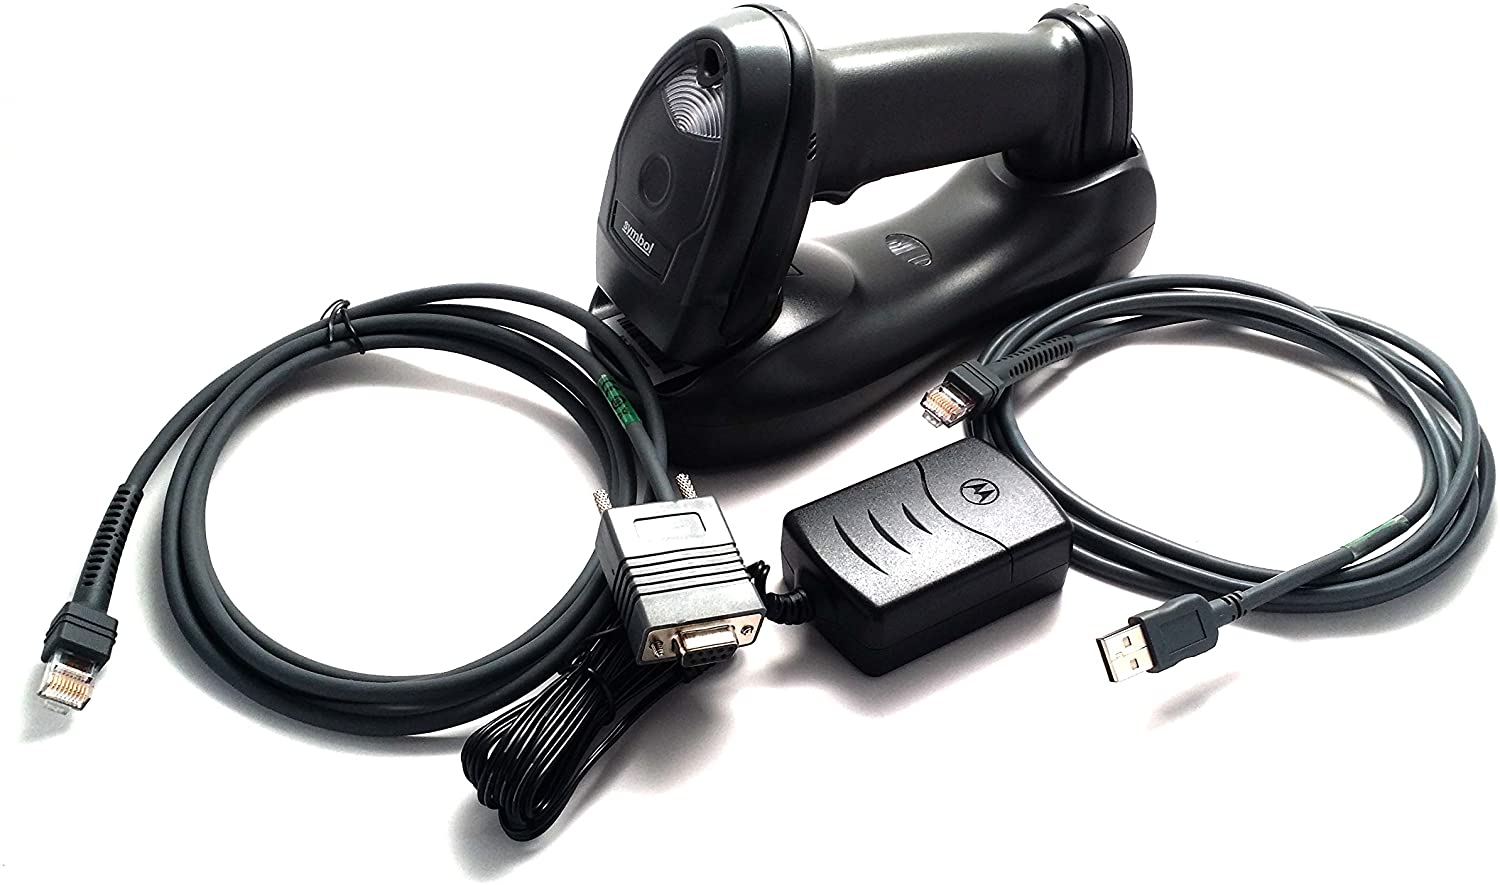 Zebra/Motorola Symbol LS4278 Cordless Bluetooth Laser Barcode Scanner Kit, Includes Cradle, Power Supply, RS232 Cable and USB Cable